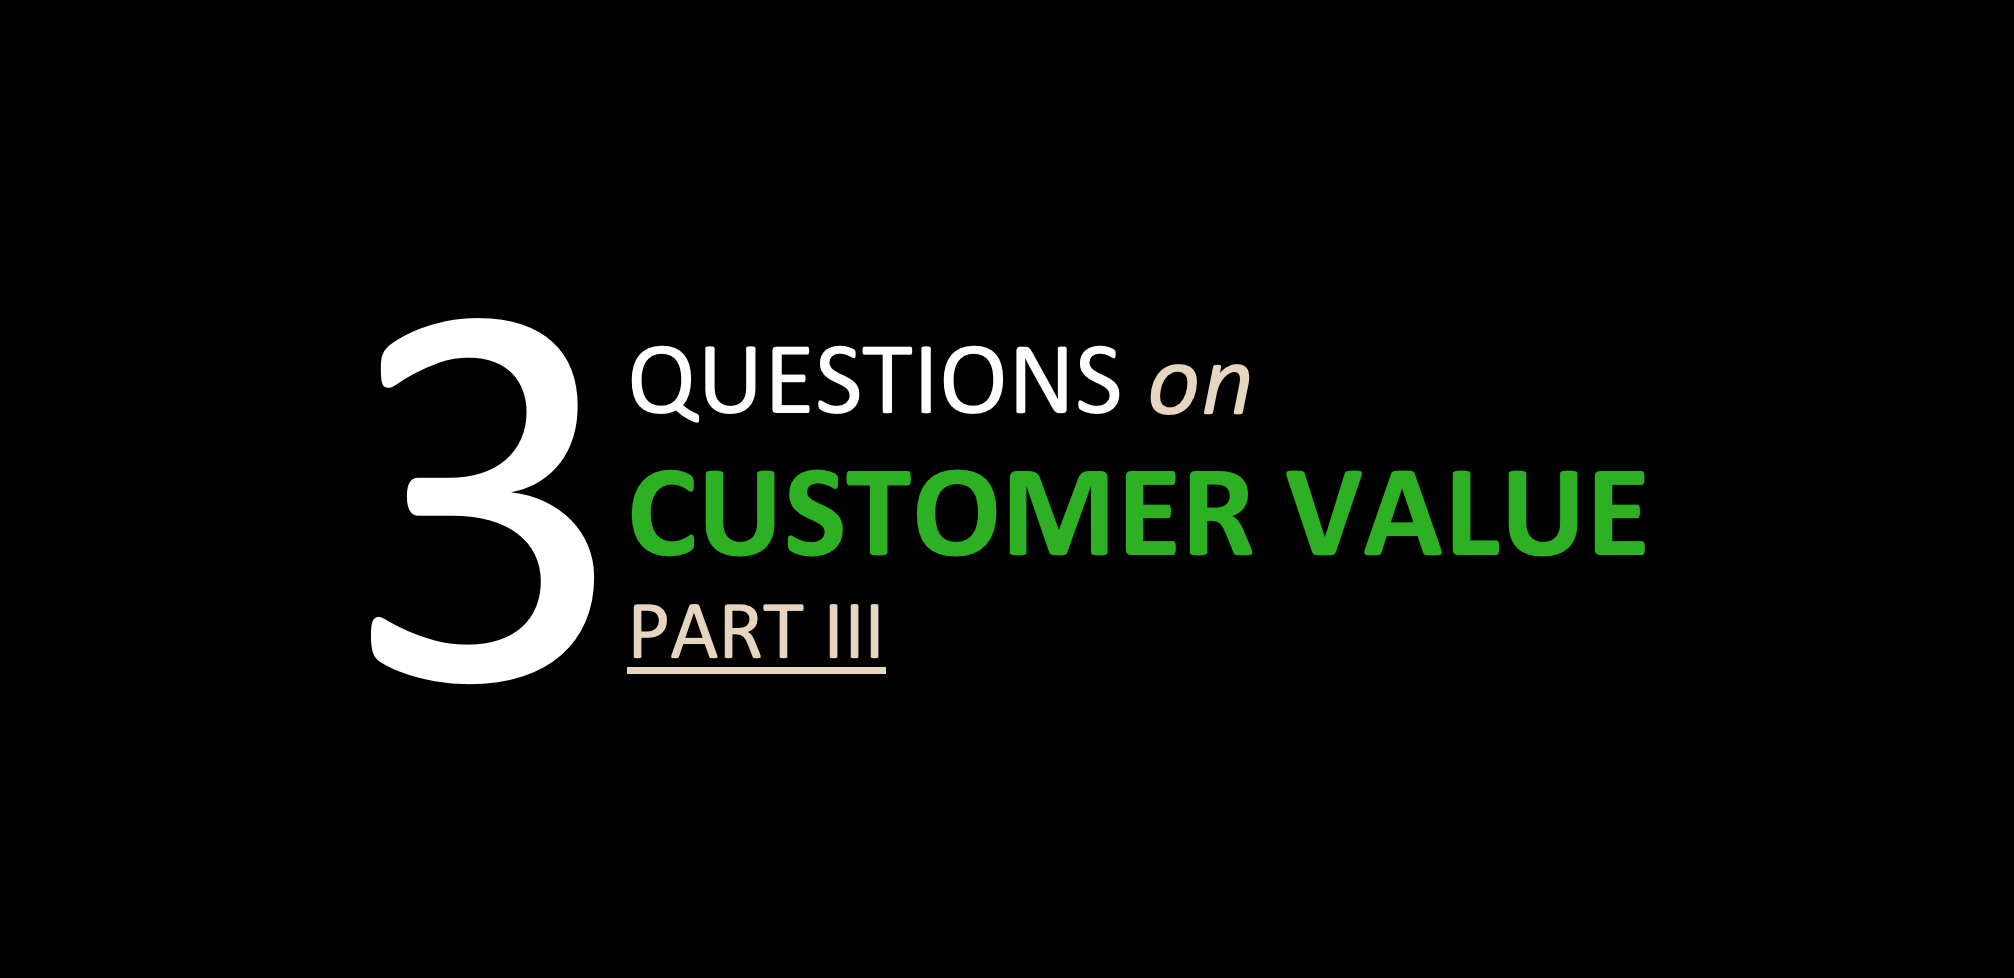 How does customer value build a competitive advantage?